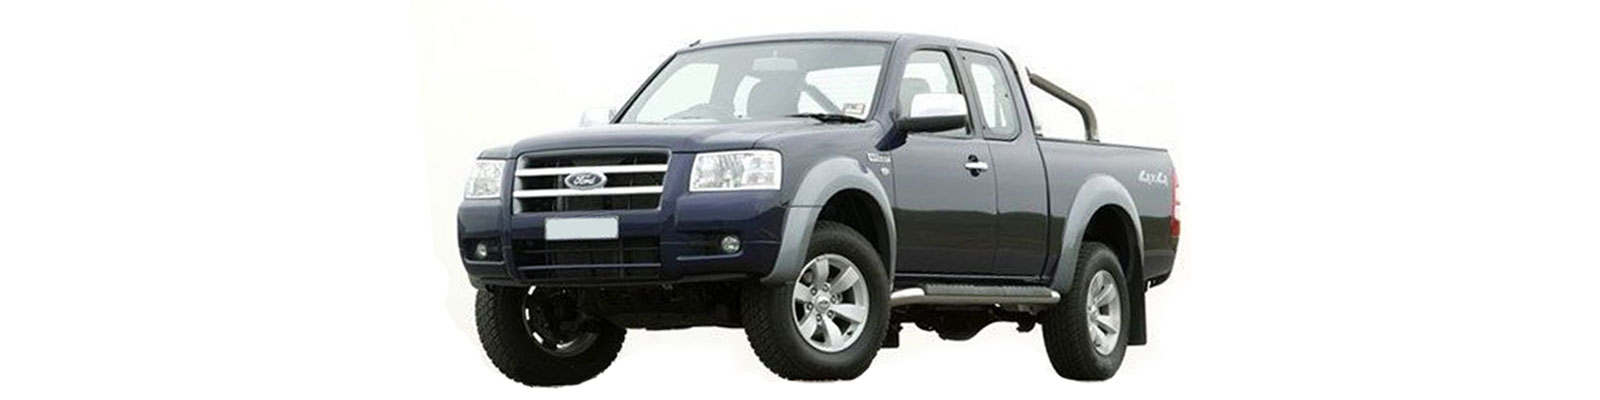 Accessories For The Ford Ranger Super Cab 2006-2009